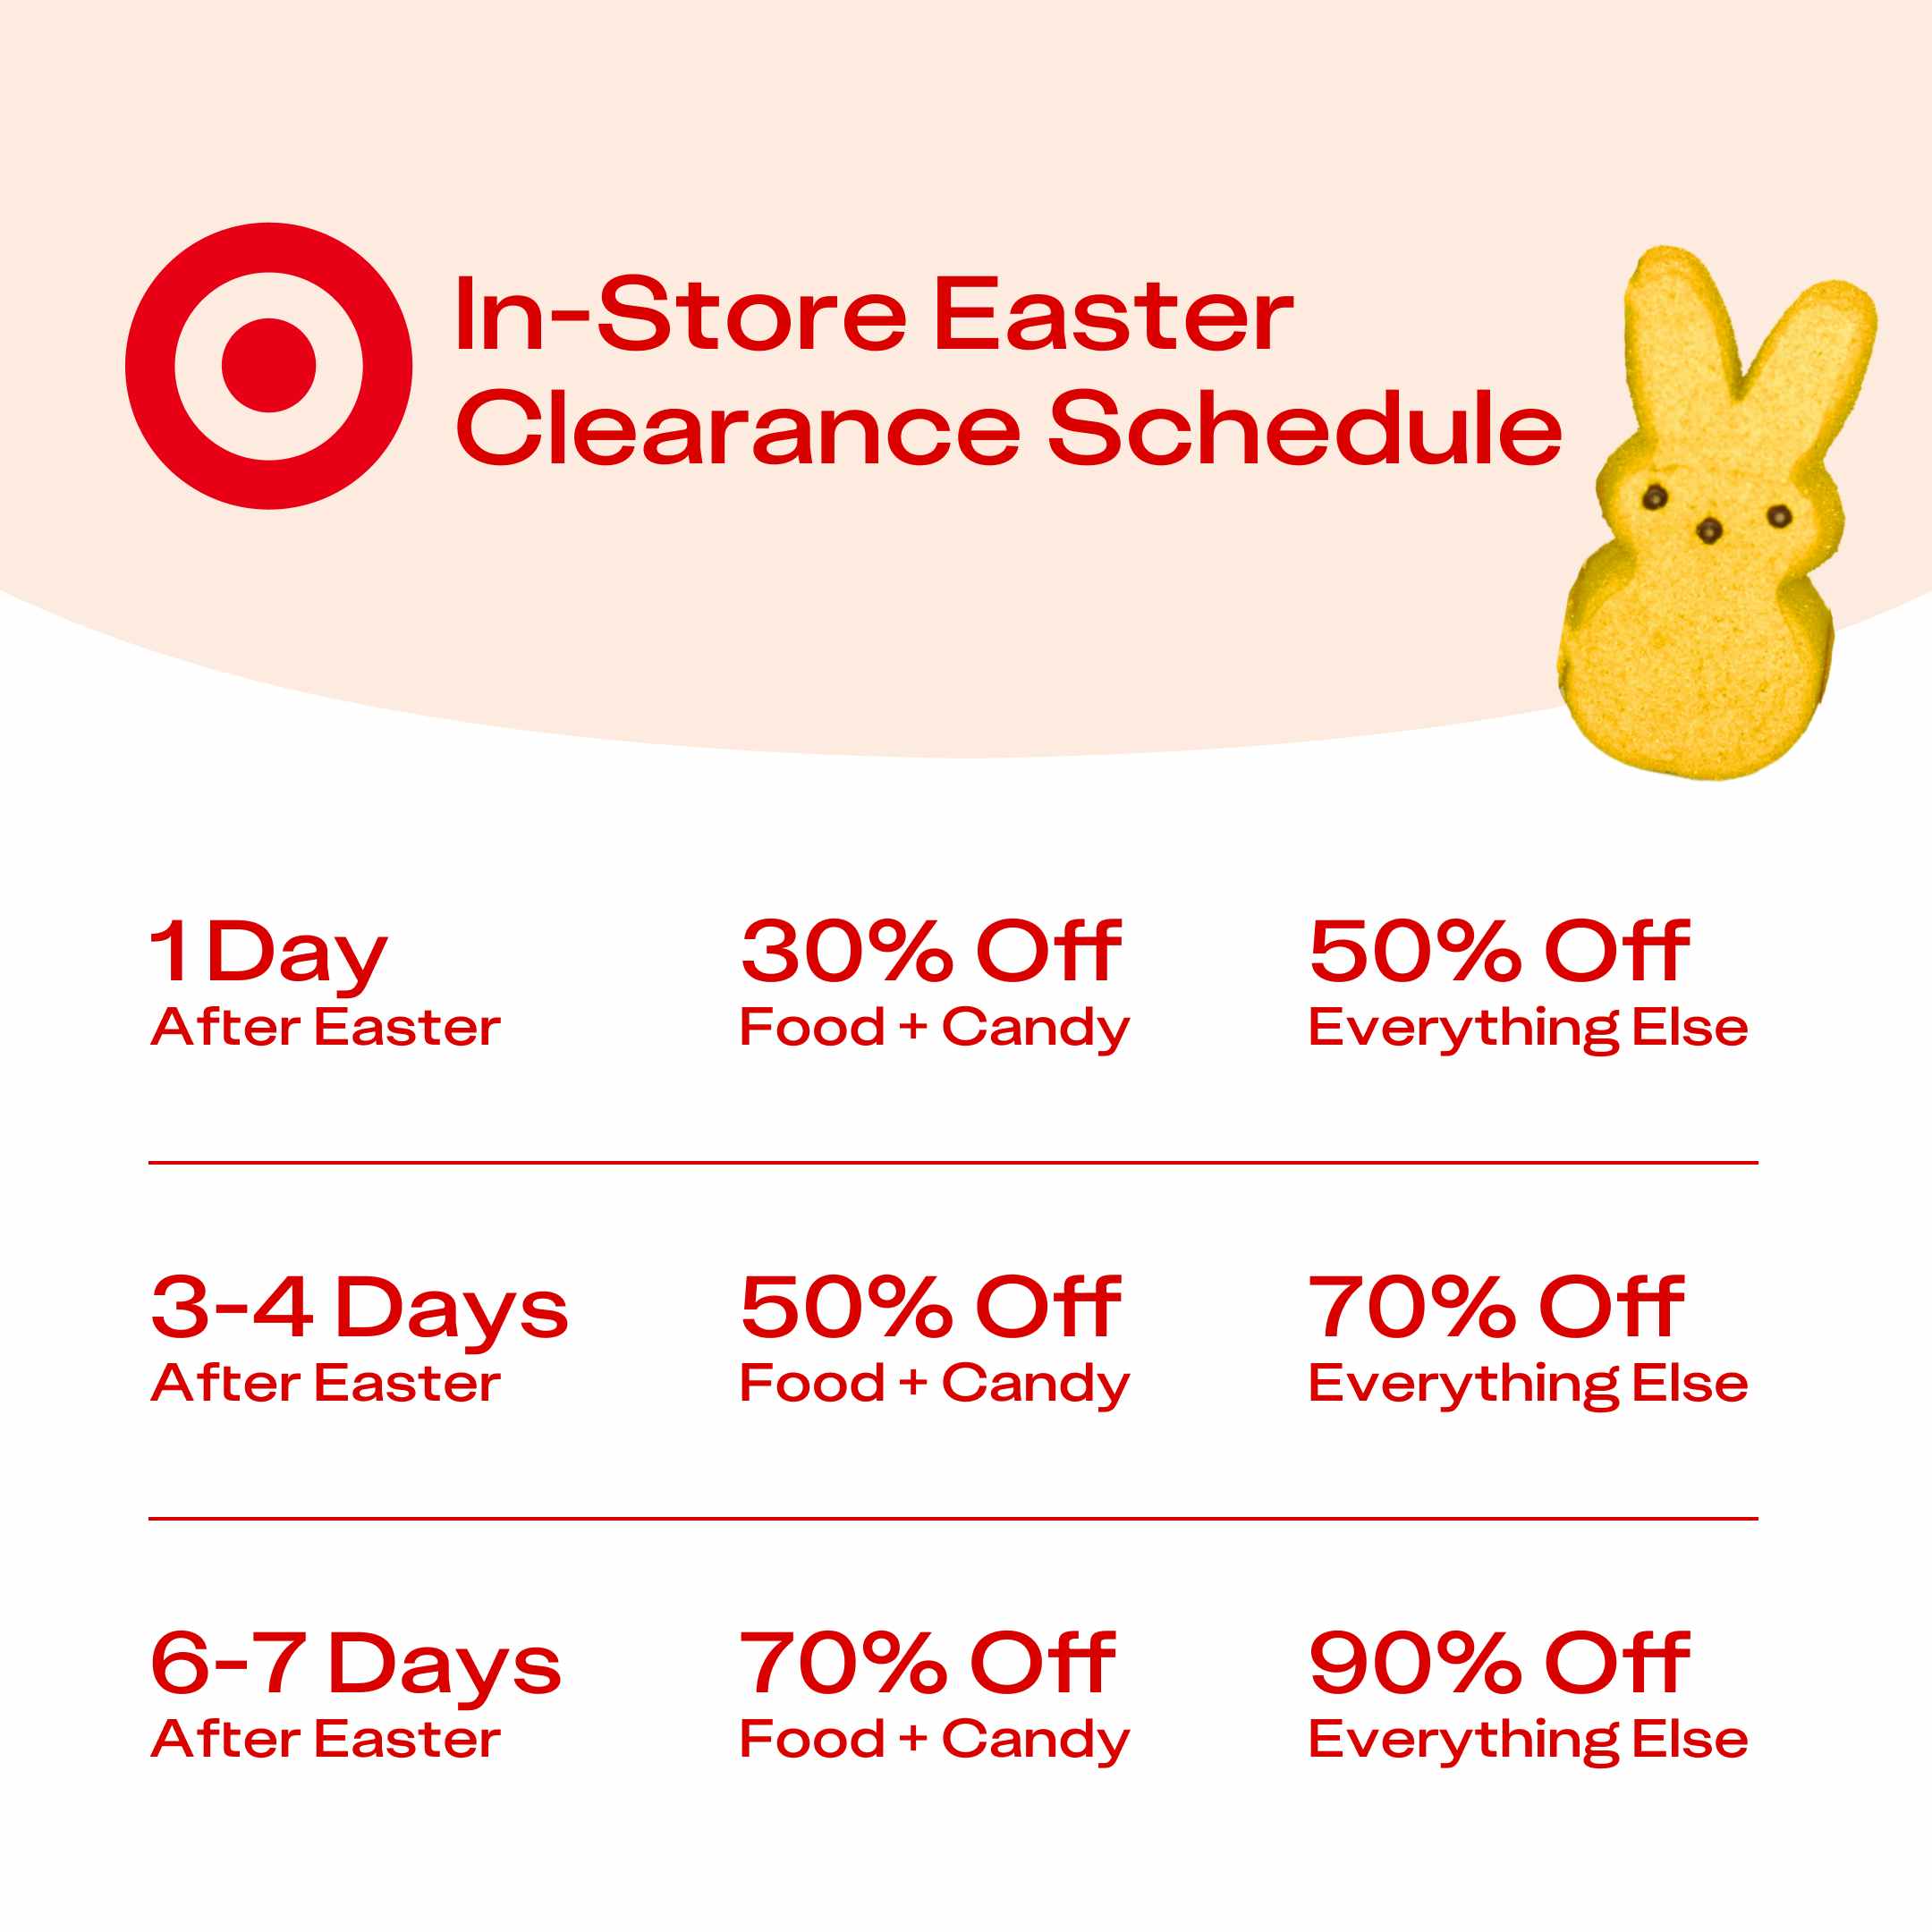 https://content-images.thekrazycouponlady.com/nie44ndm9bqr/775Mz4dSwOaOhrcmb2ZslC/4cdb19c5db09b793d9847df51664ace0/Target_In-Store_Easter_Clearance_Schedule_EDIT.png?auto=format&fit=max&w=2160&q=25